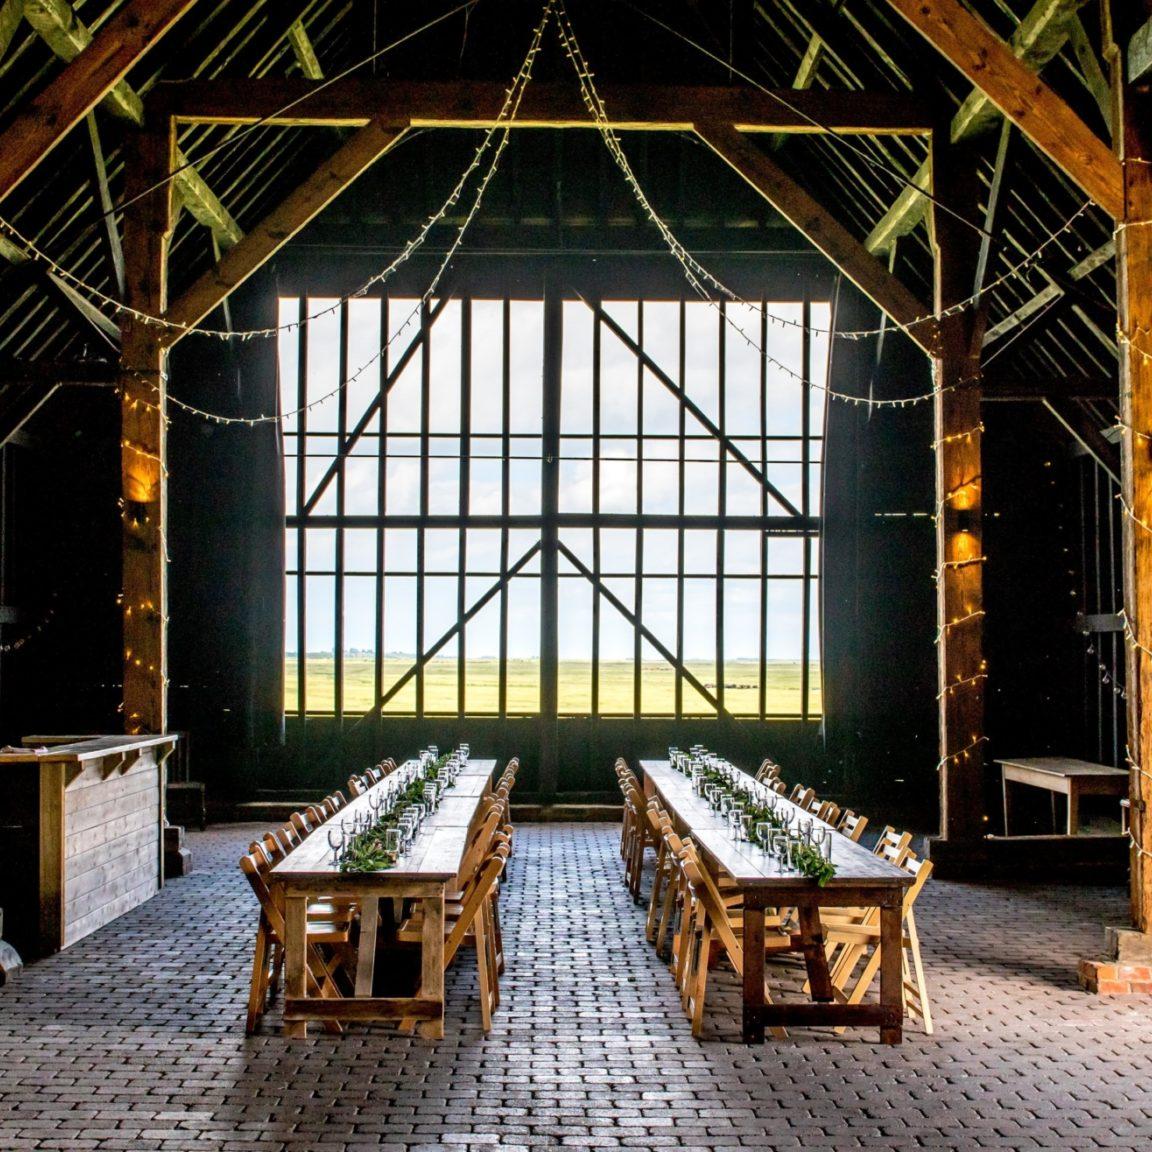 Kingshill Barn set up for feasting dinner corporate event